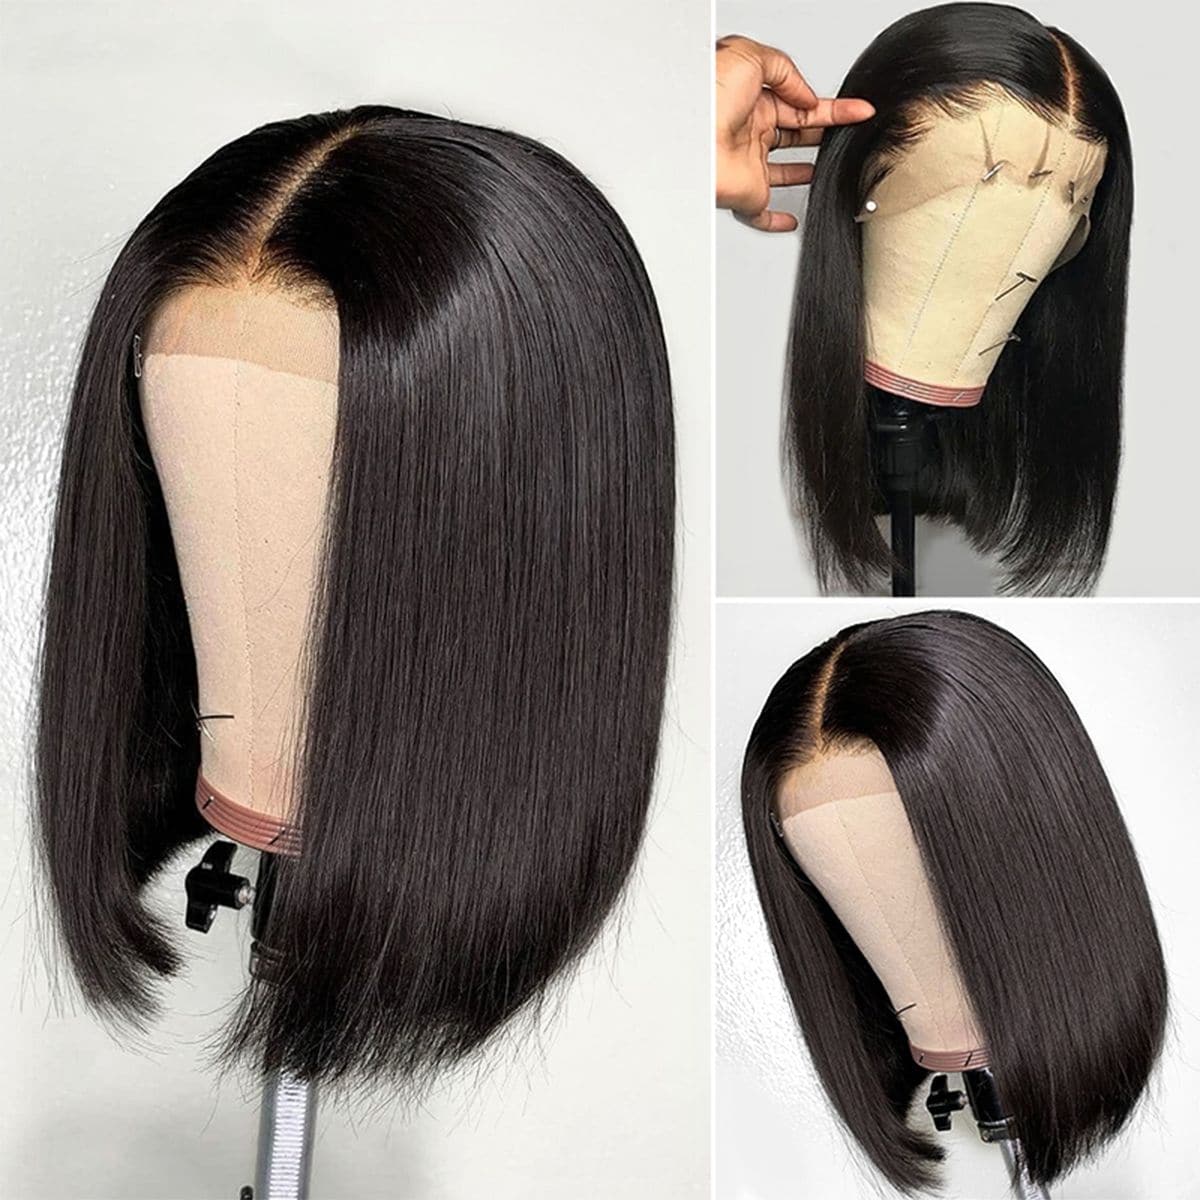 Urgirl Asymmetrical Bob Wigs Blunt Haircuts Lace Front Wigs with Side Part Perfect For Any Face Shapes